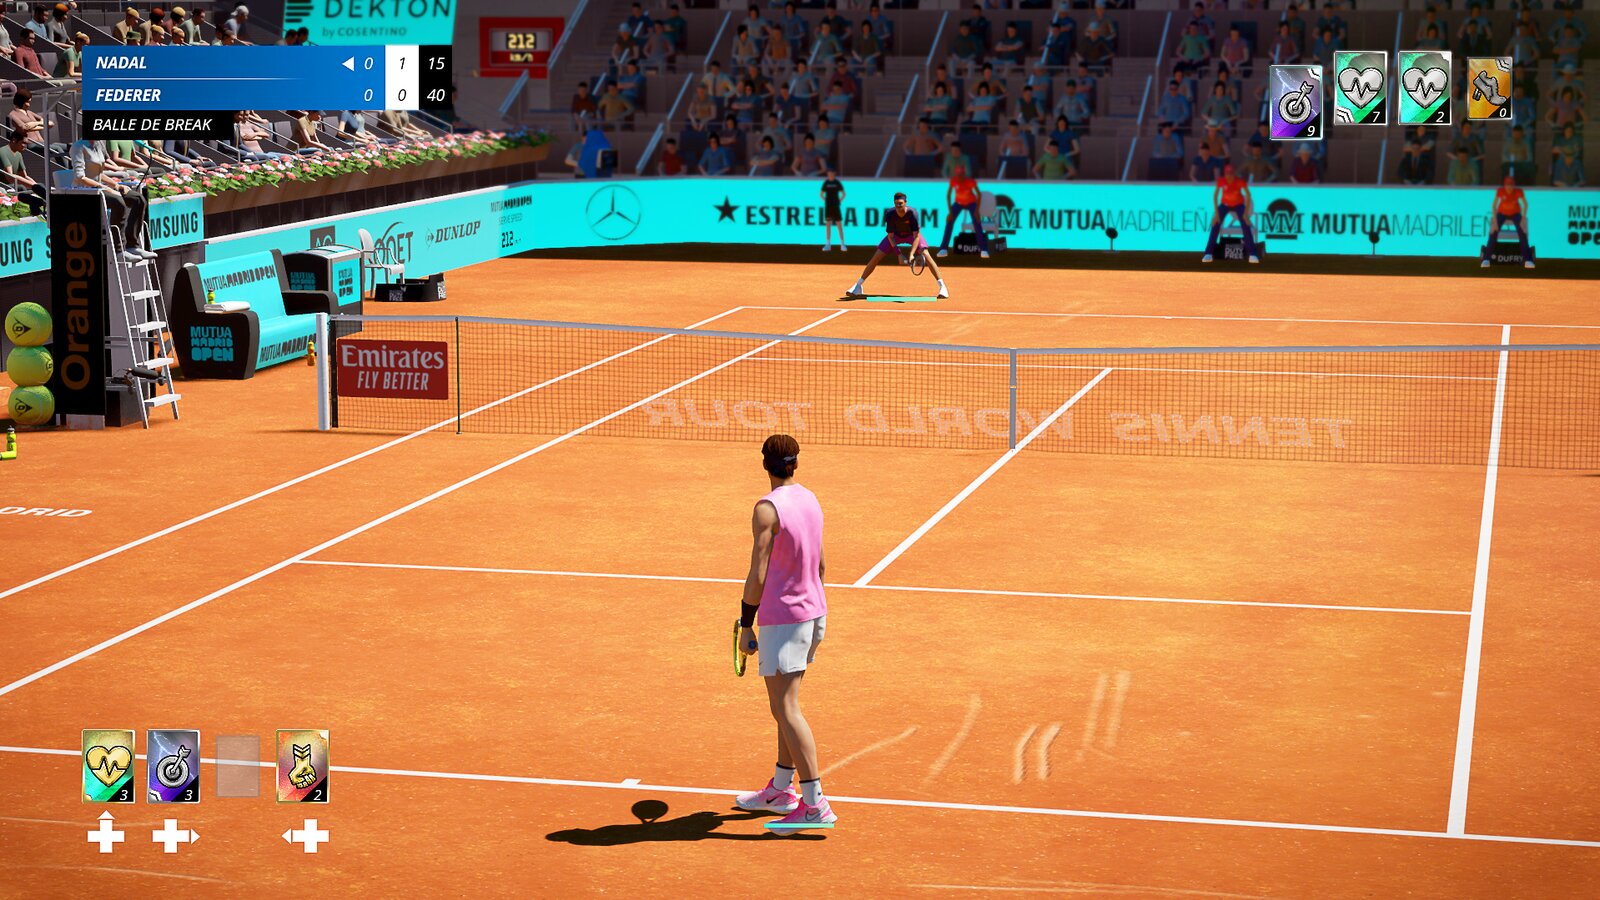 Tennis World Tour 2 - Official Tournaments and Stadia Pack